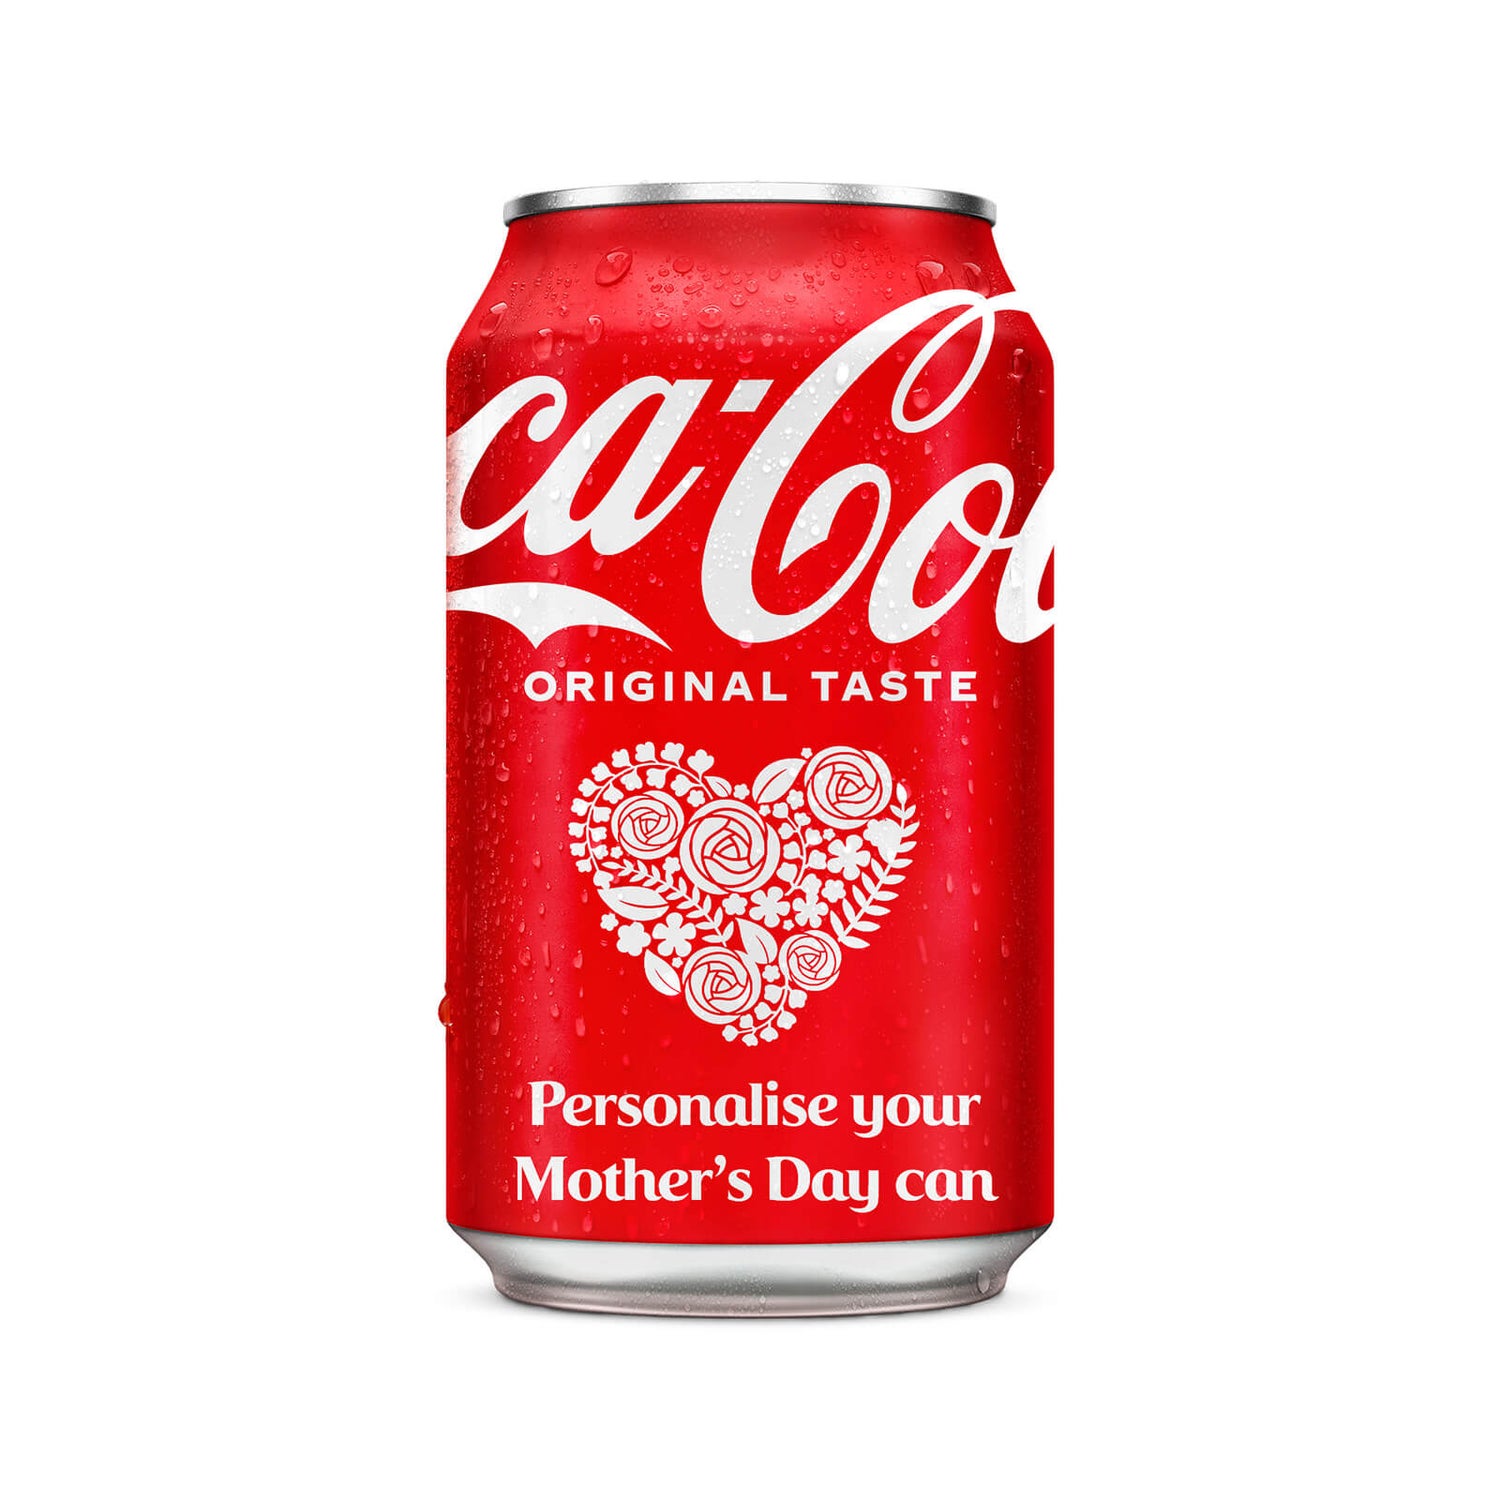 Coca-Cola Original Taste 330ml - Personalised Can - Mother's Day Heart of Hearts